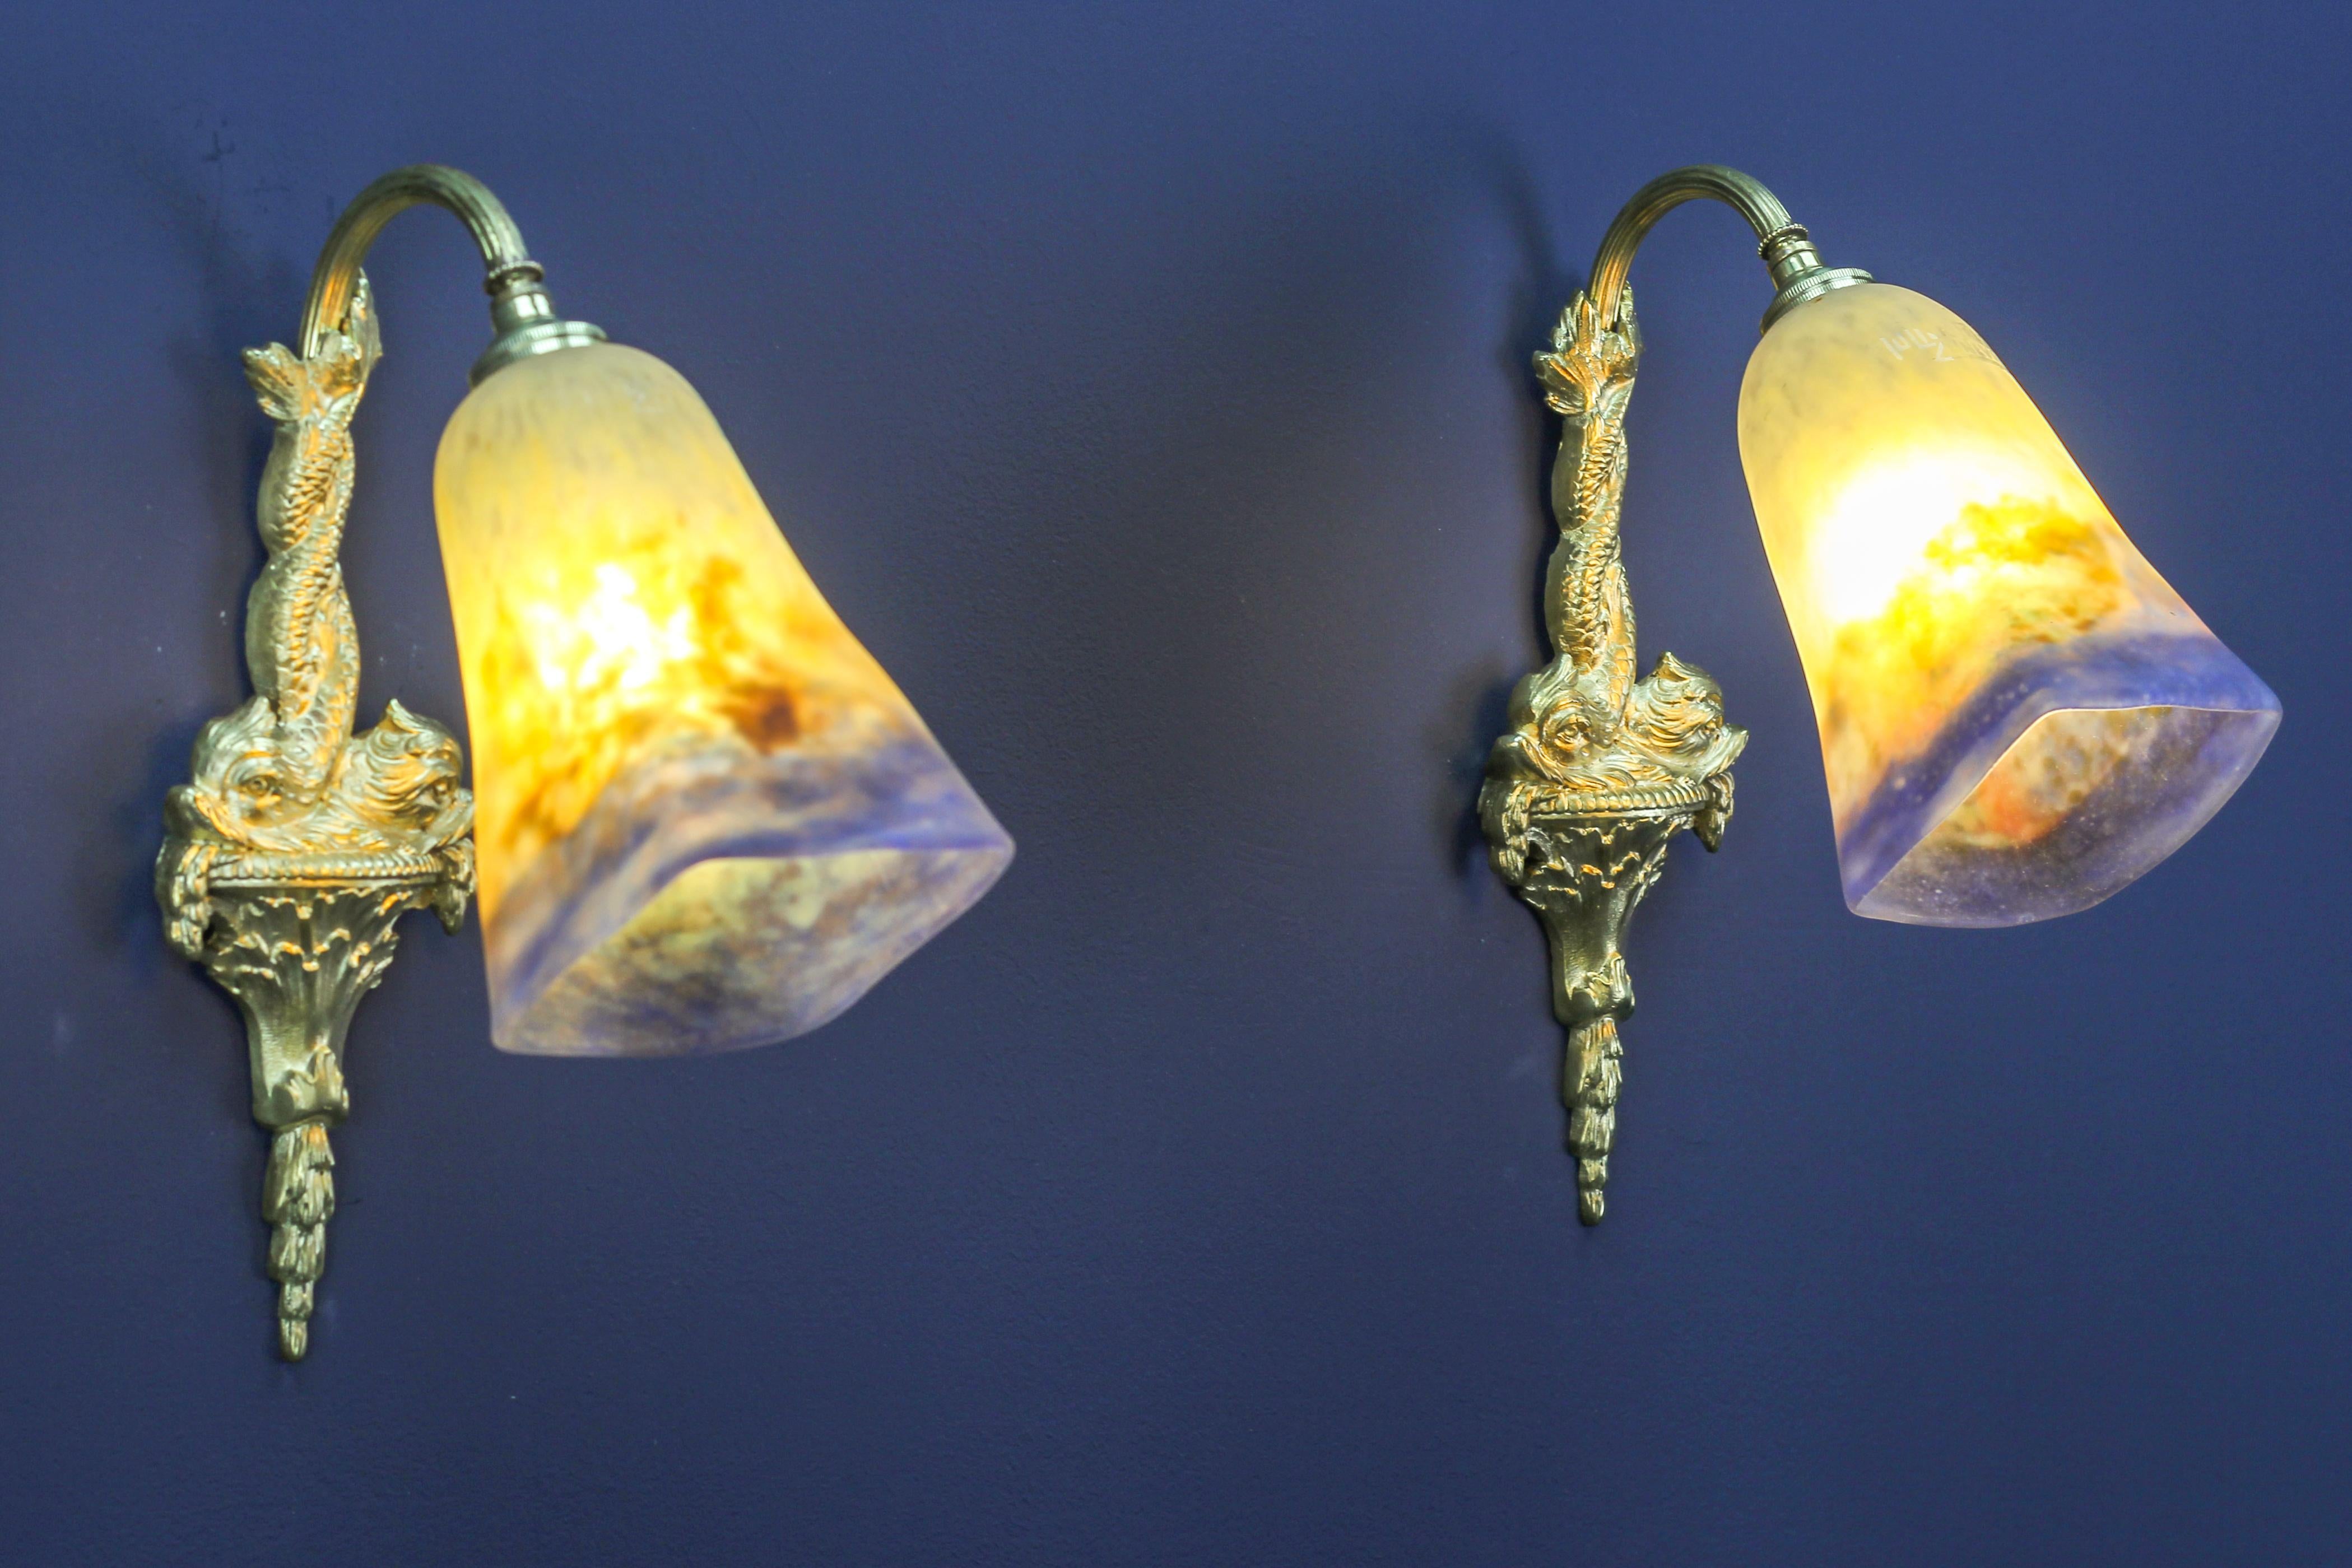 Pair of French bronze sconces with dolphins and Muller Fres Luneville glass.
A beautiful pair of bronze sconces each with motifs of two dolphins and “Pâte de Verre” glass lampshades in white, blue, orange, and olive green tones, each signed Muller